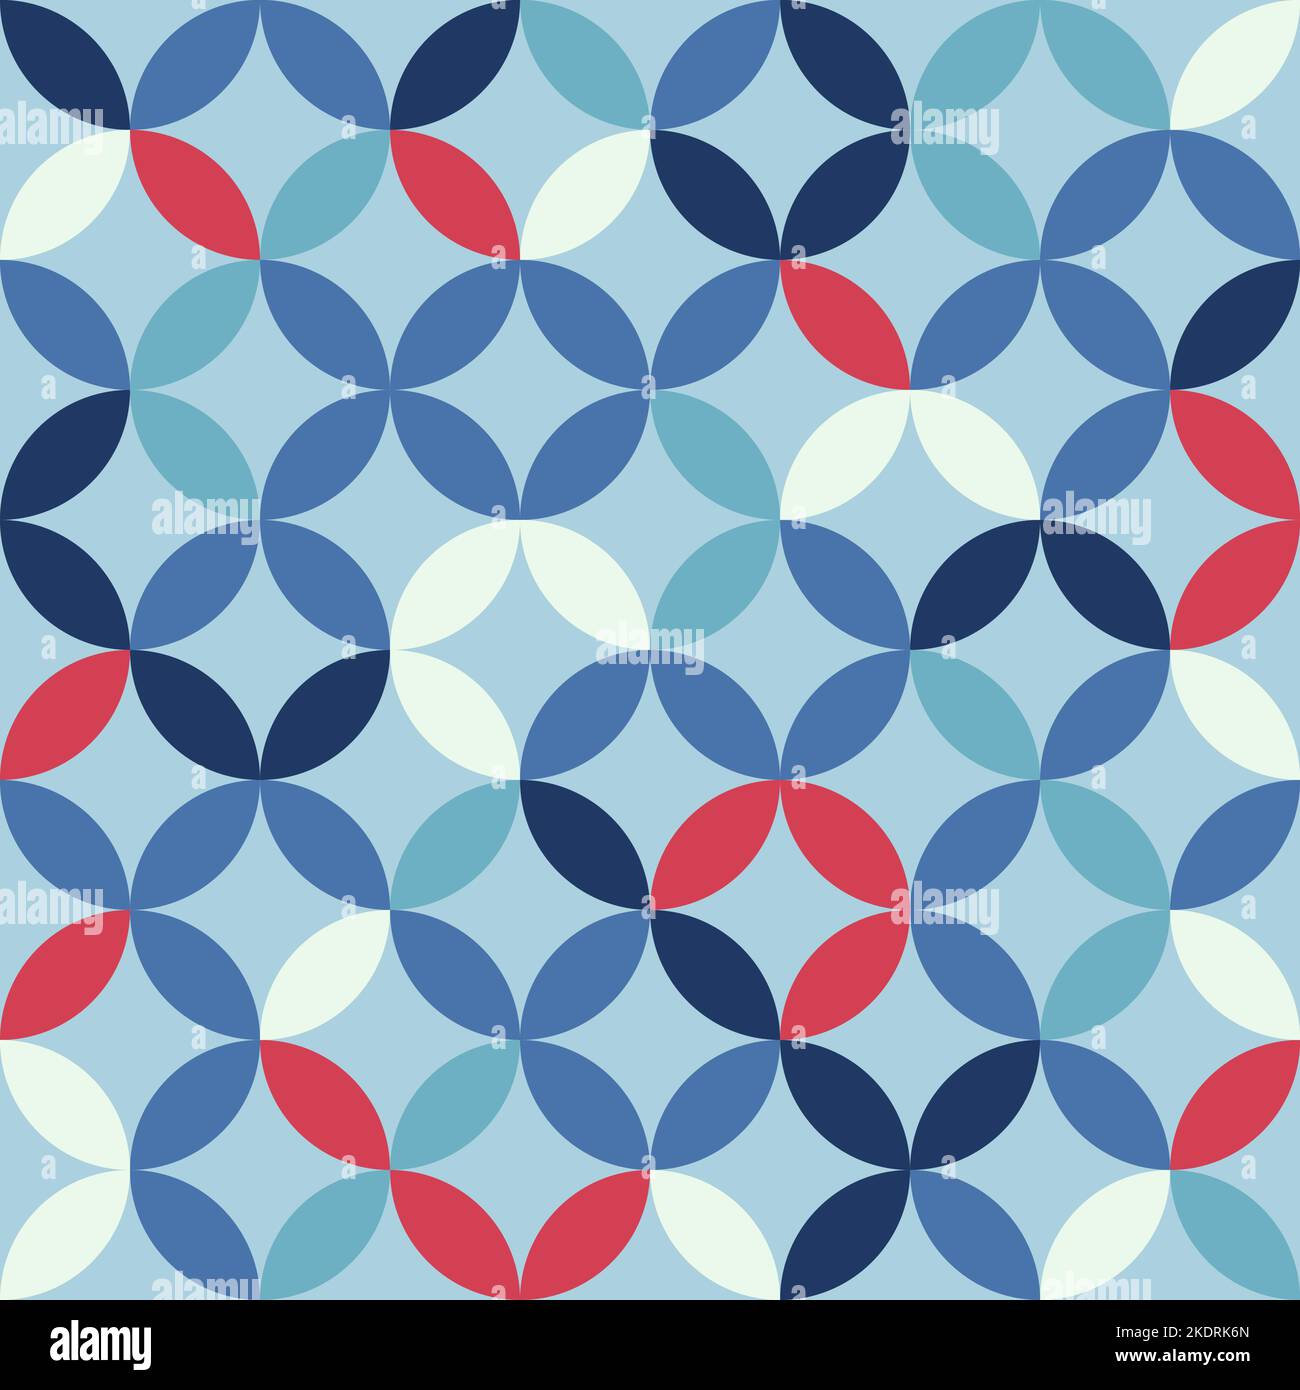 Blue geometric pattern. Interconnecting circles and ovals abstract retro fashion texture. Seamless pattern. Blue and red. Stock Vector